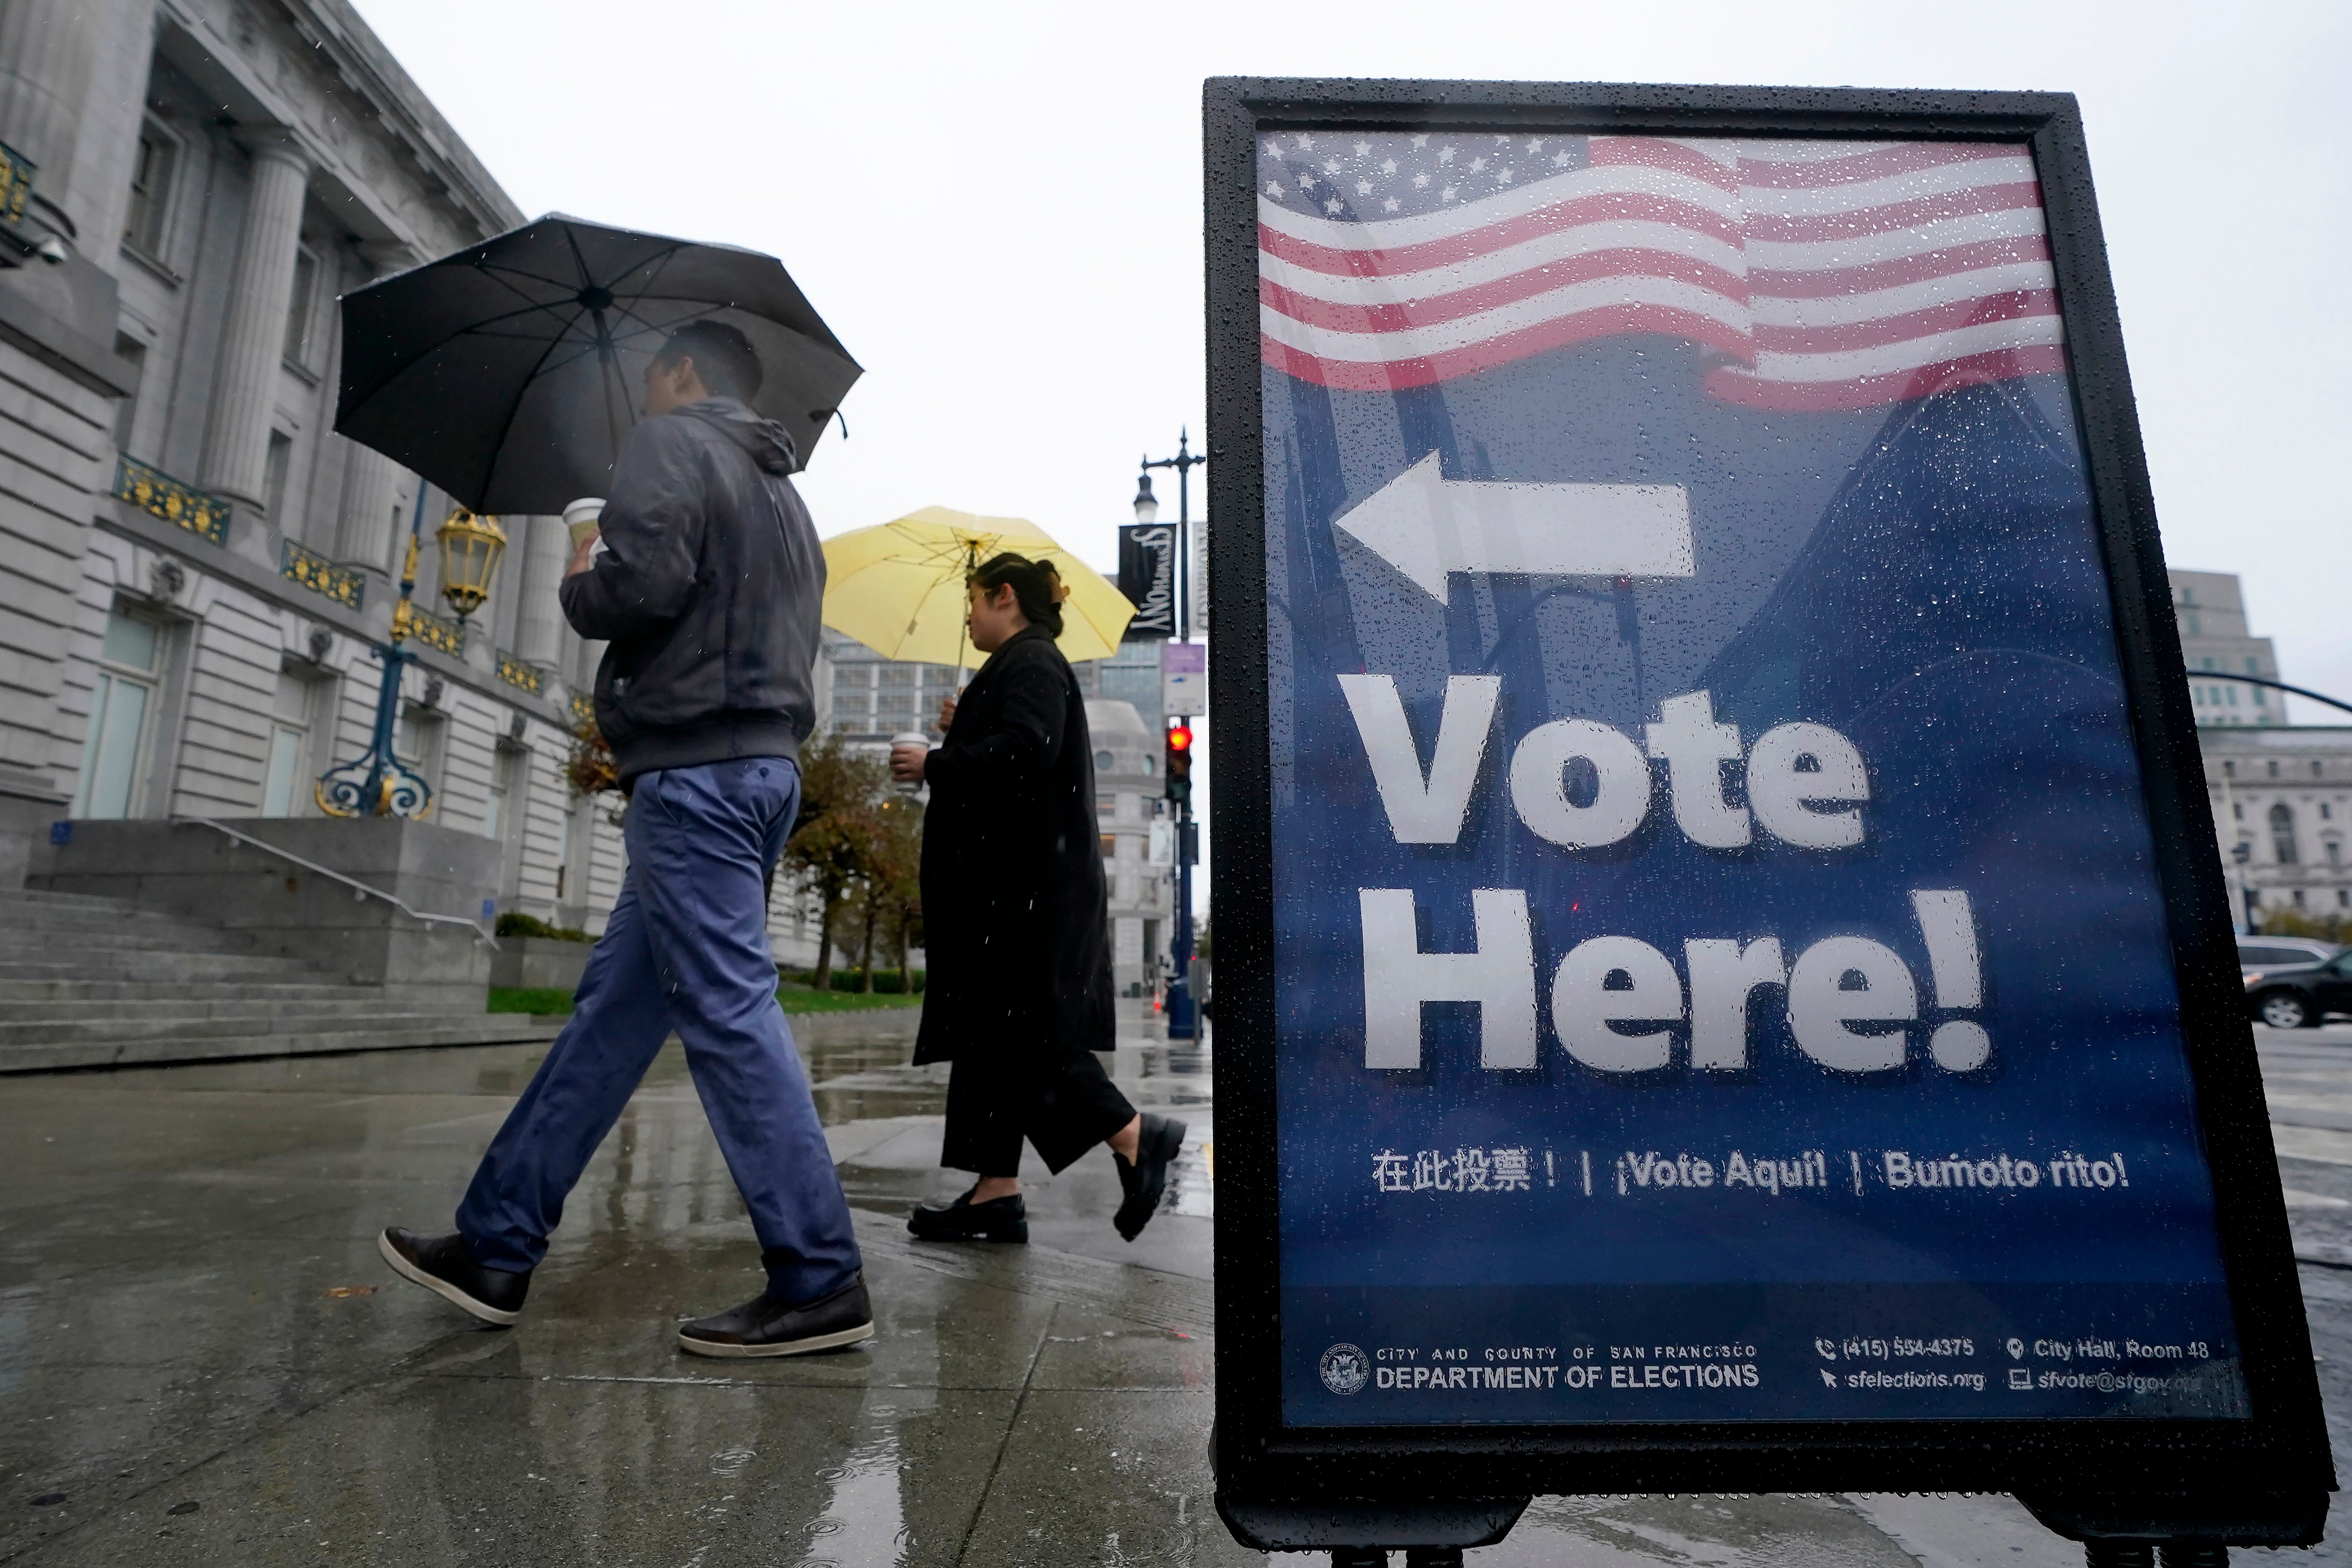 People carry umbrellas while walking past a voting sign outside City Hall in San Francisco